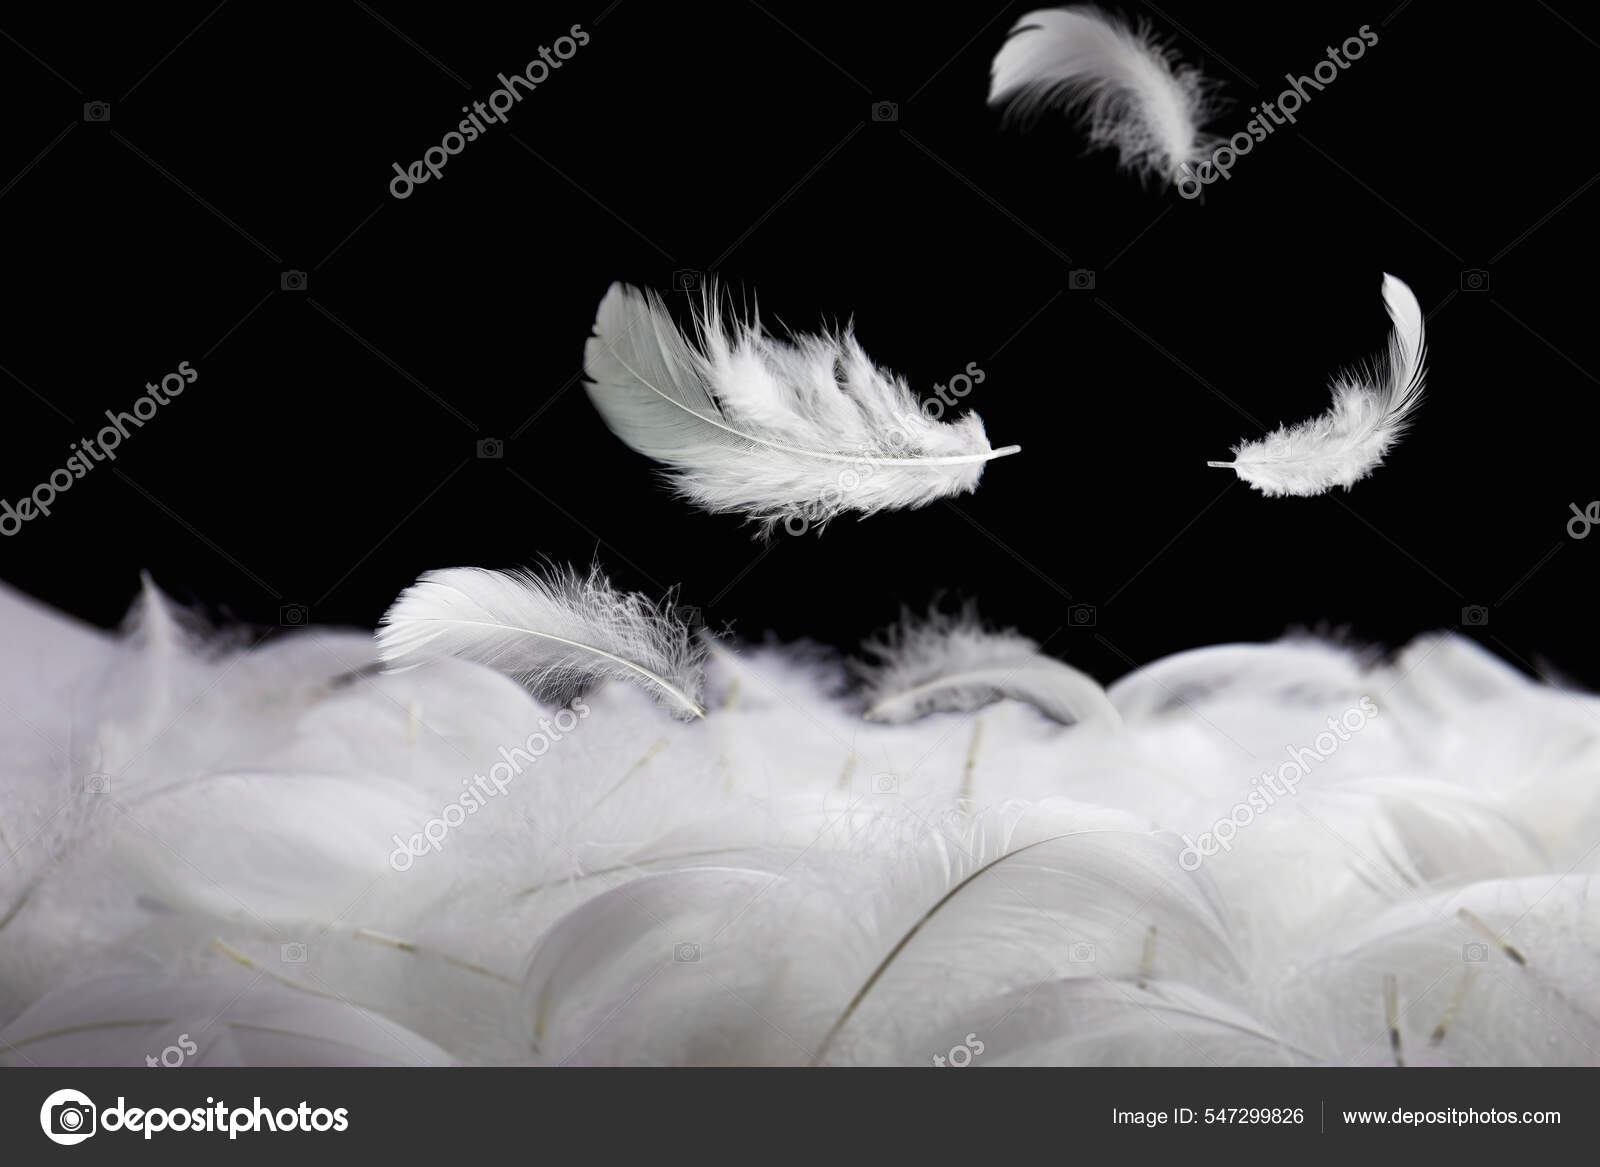 solf white feathers falling in the air. black background. Stock Photo